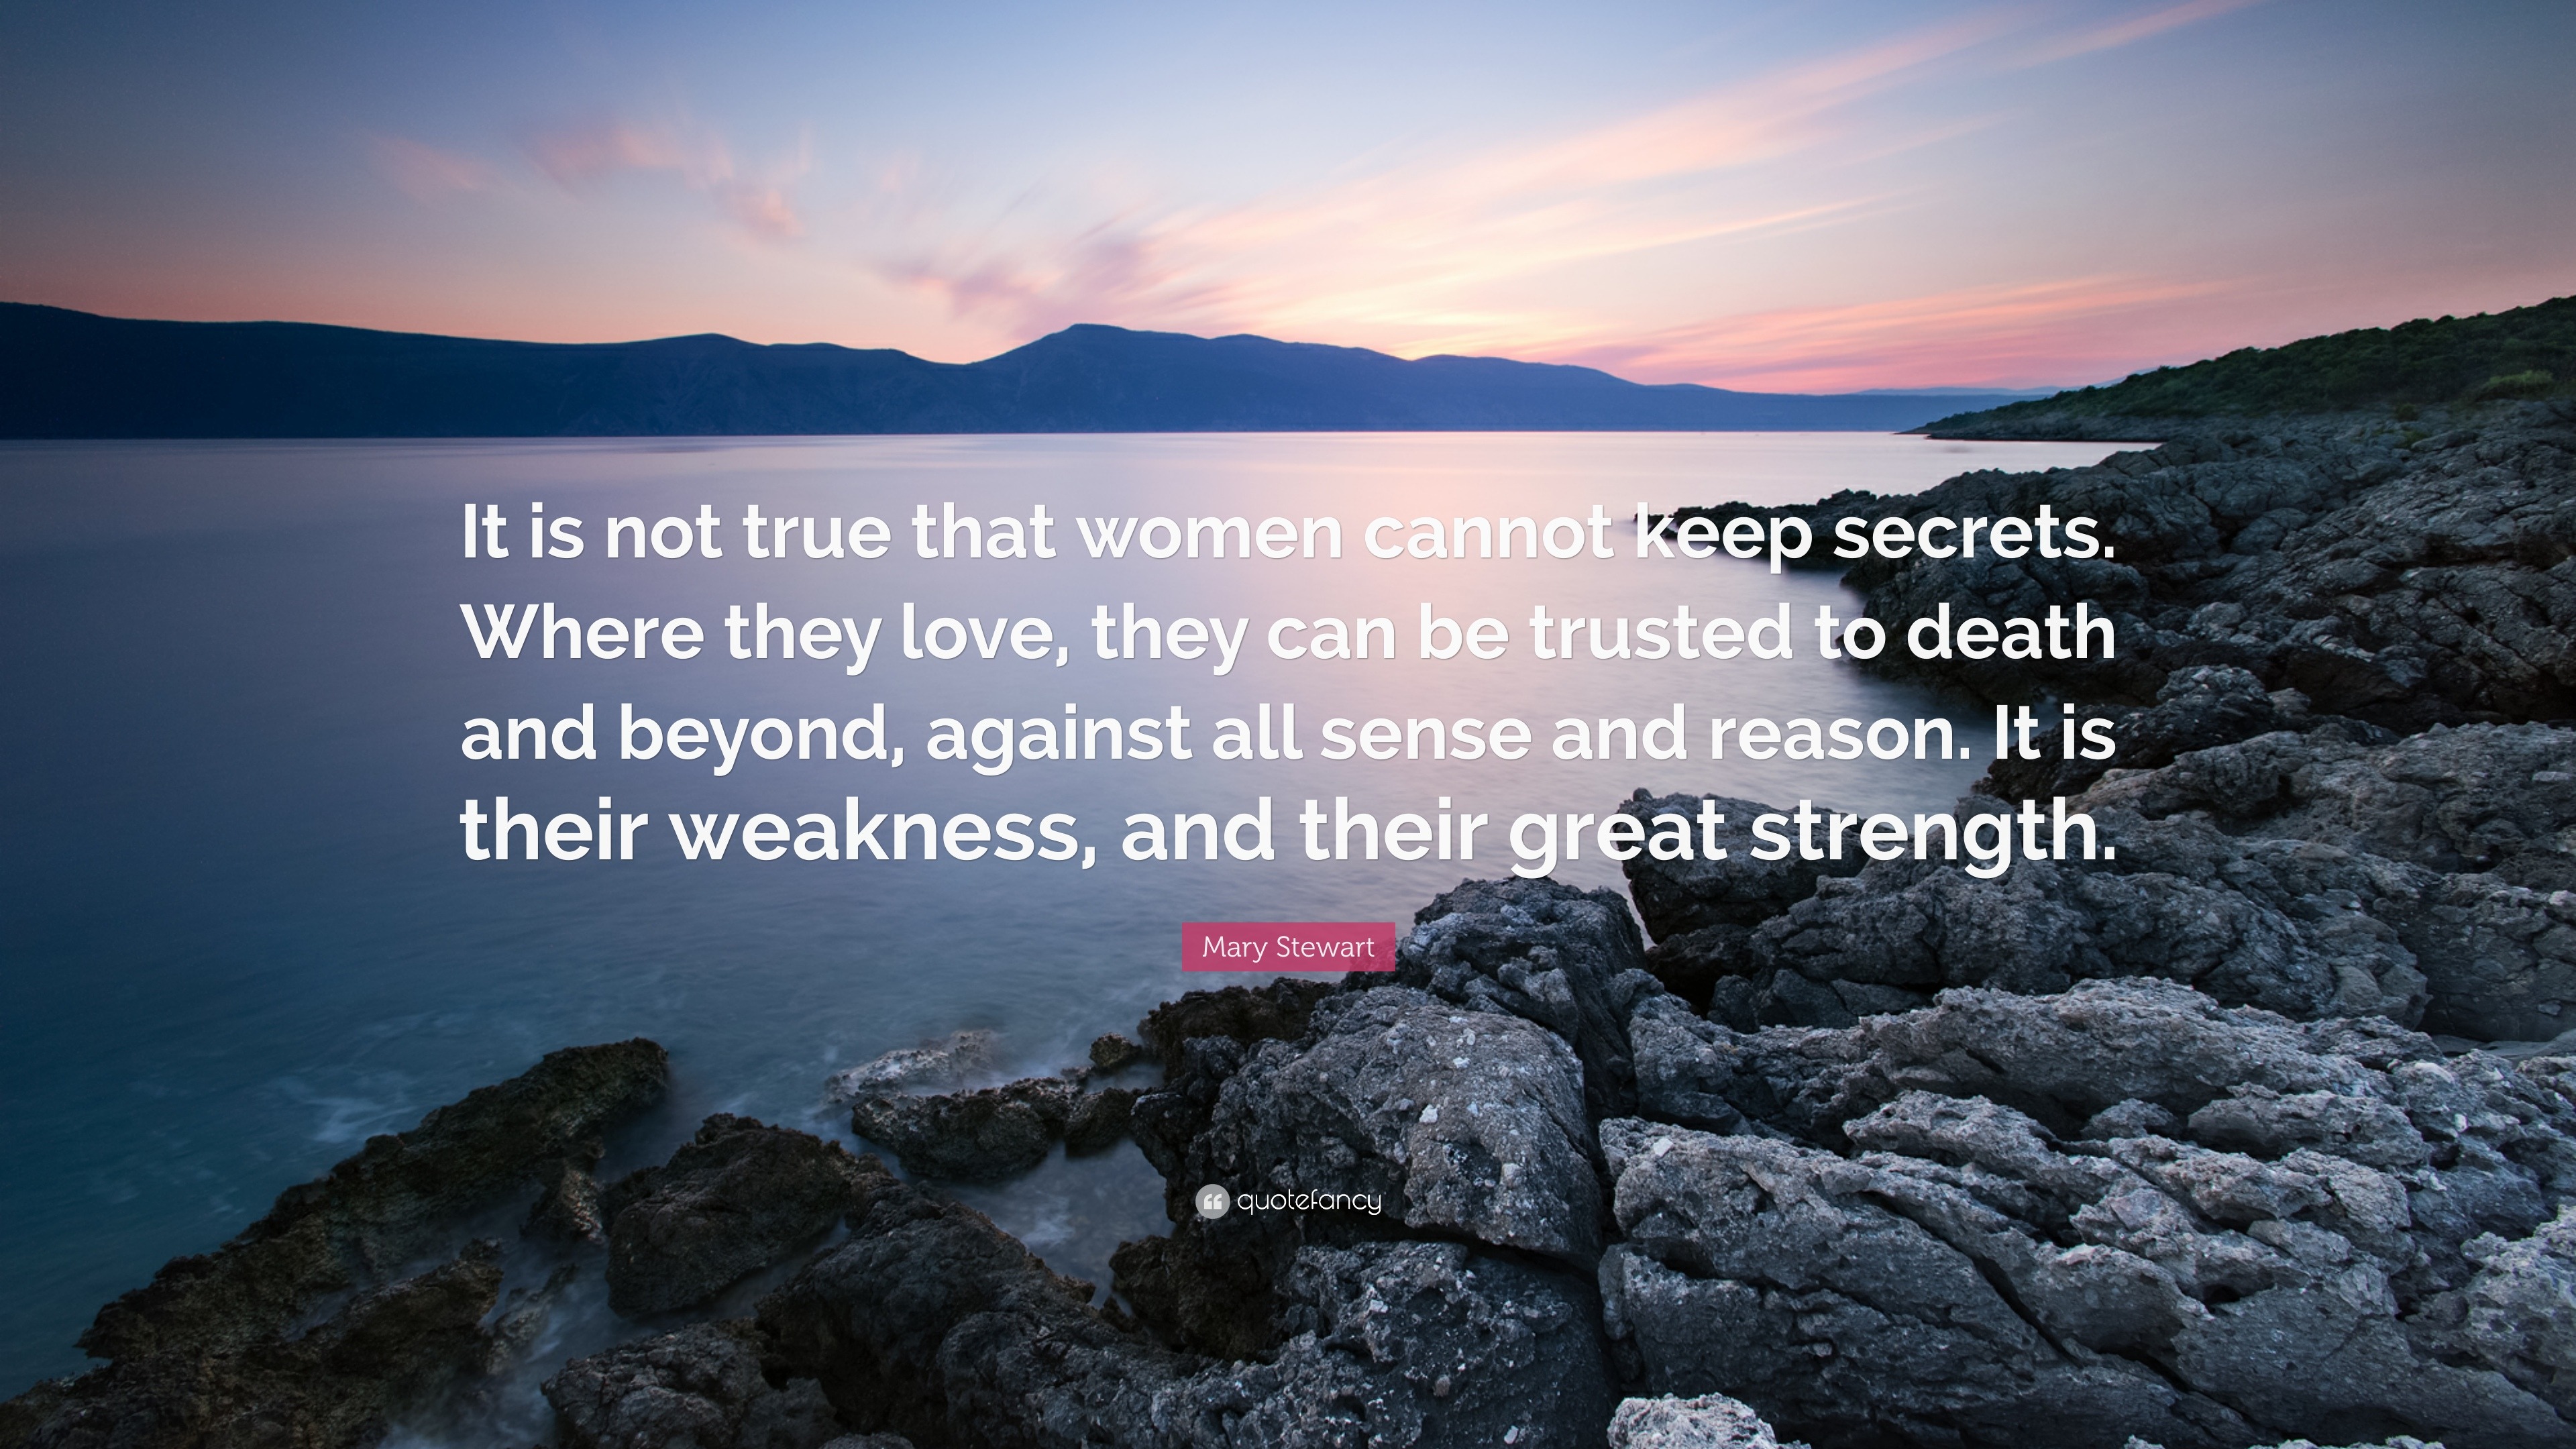 Mary Stewart Quote: “It is not true that women cannot keep secrets ...